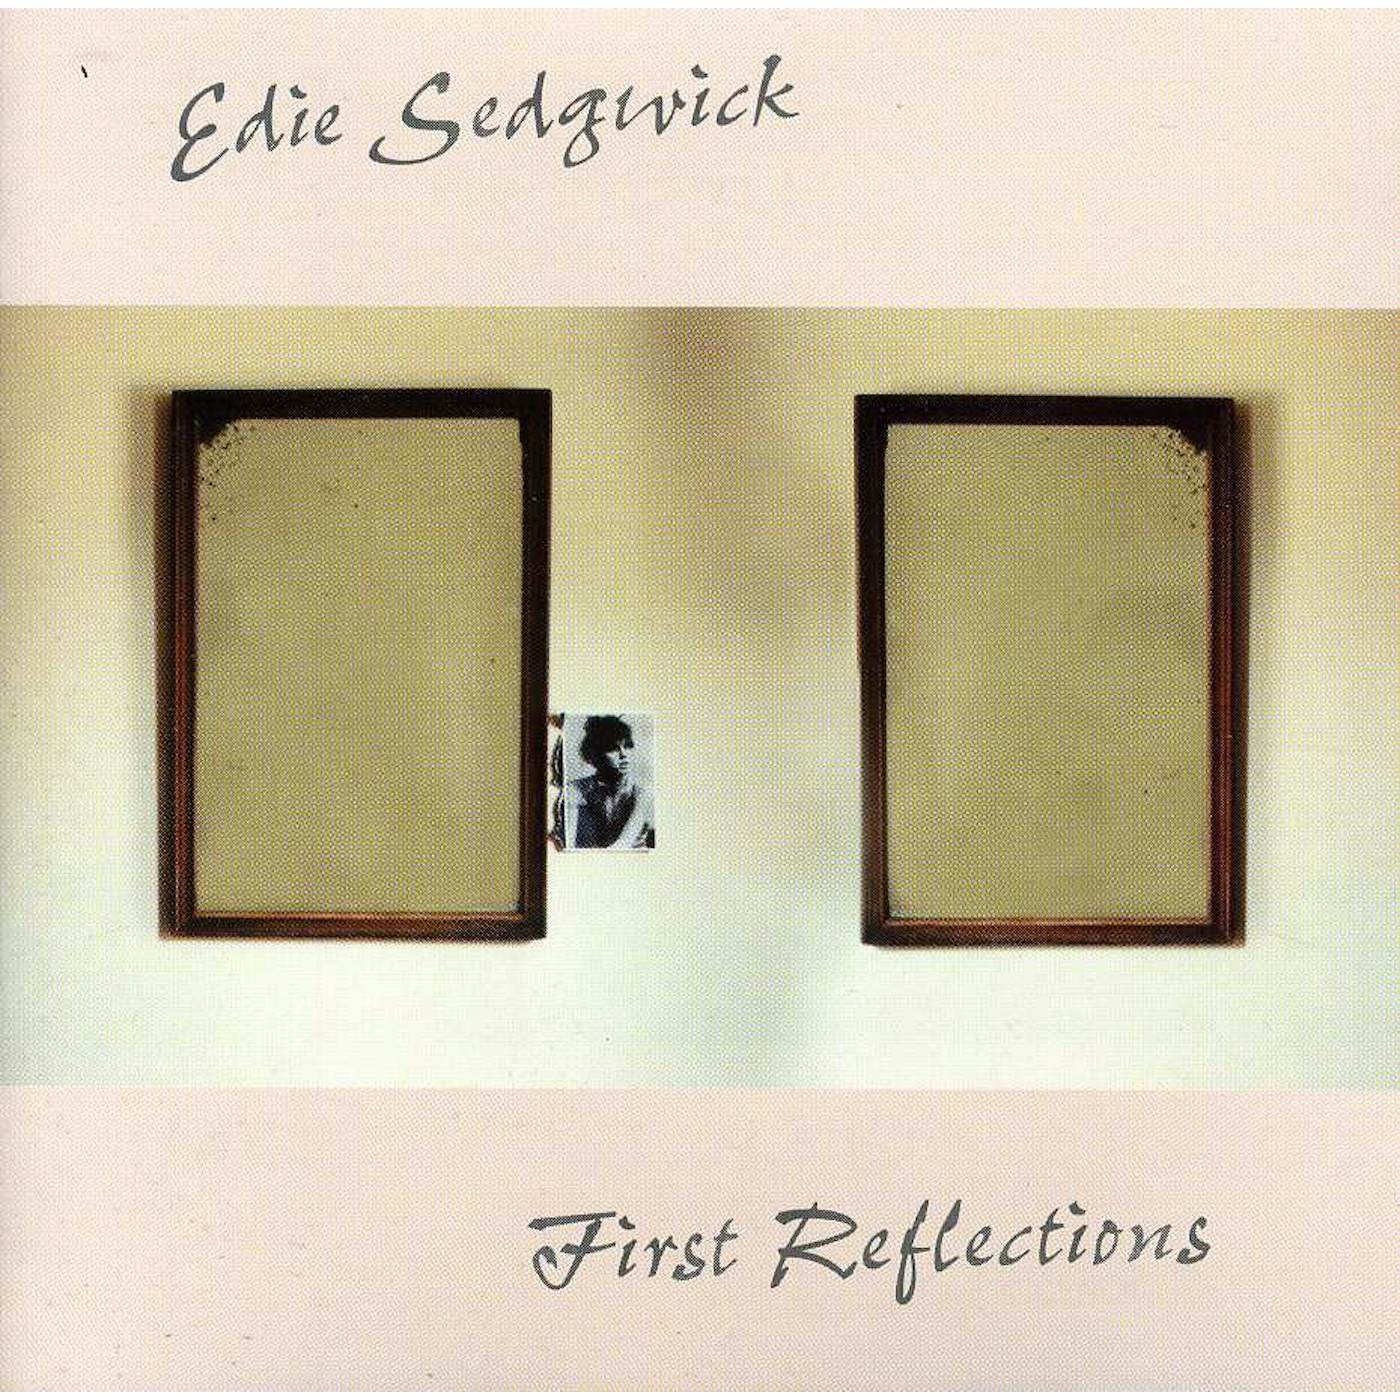 Edie Sedgwick FIRST REFLECTIONS CD